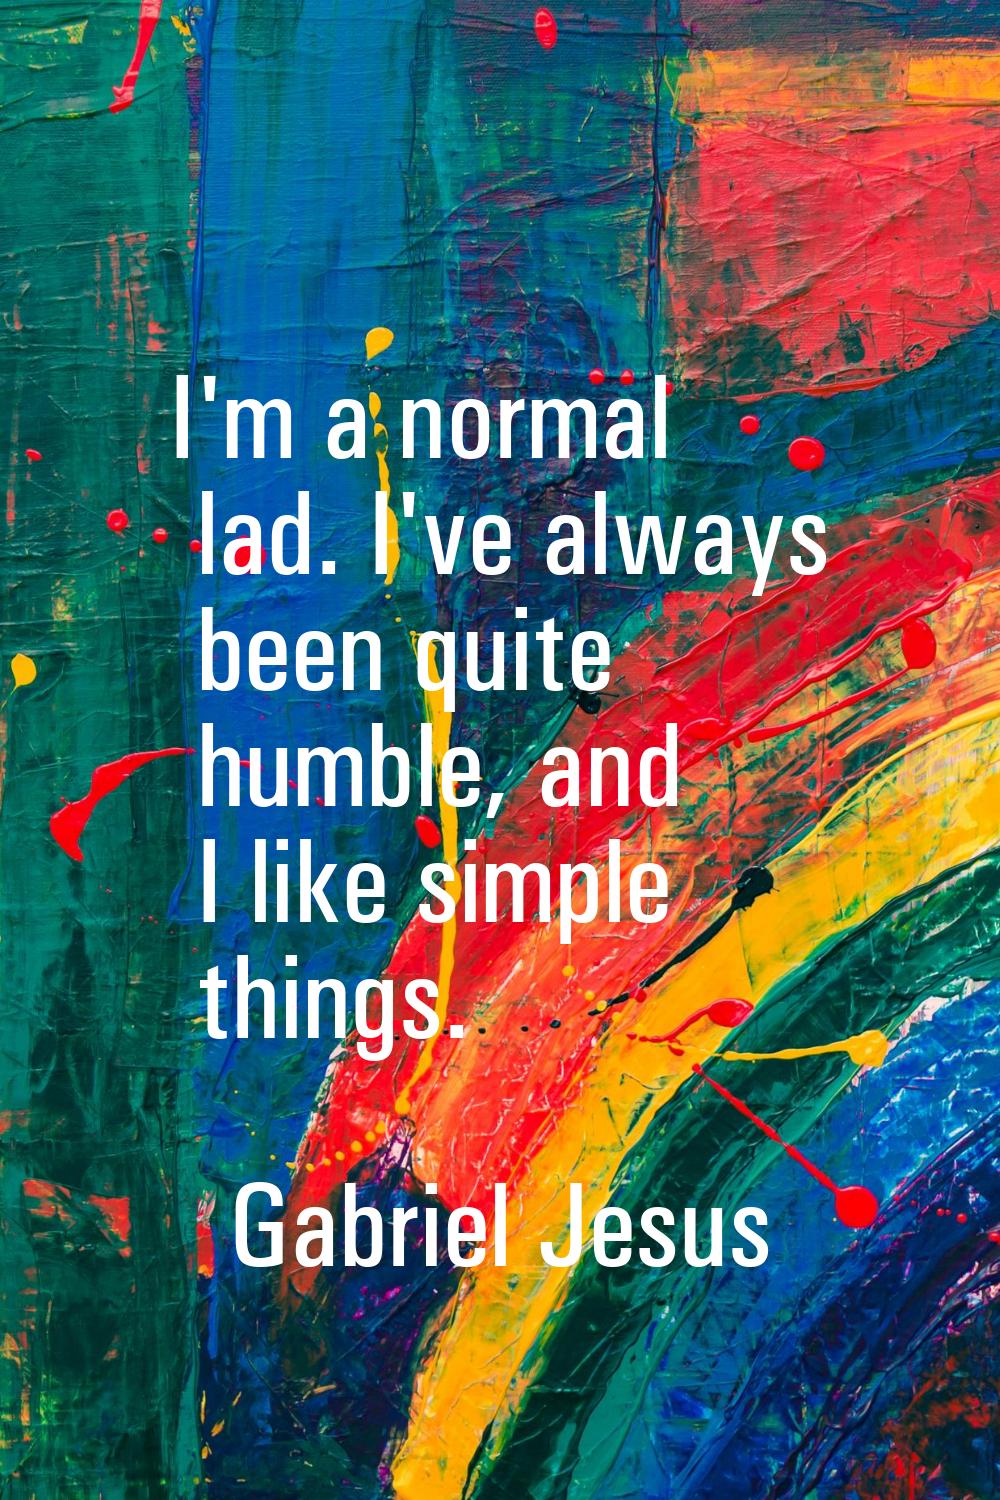 I'm a normal lad. I've always been quite humble, and I like simple things.